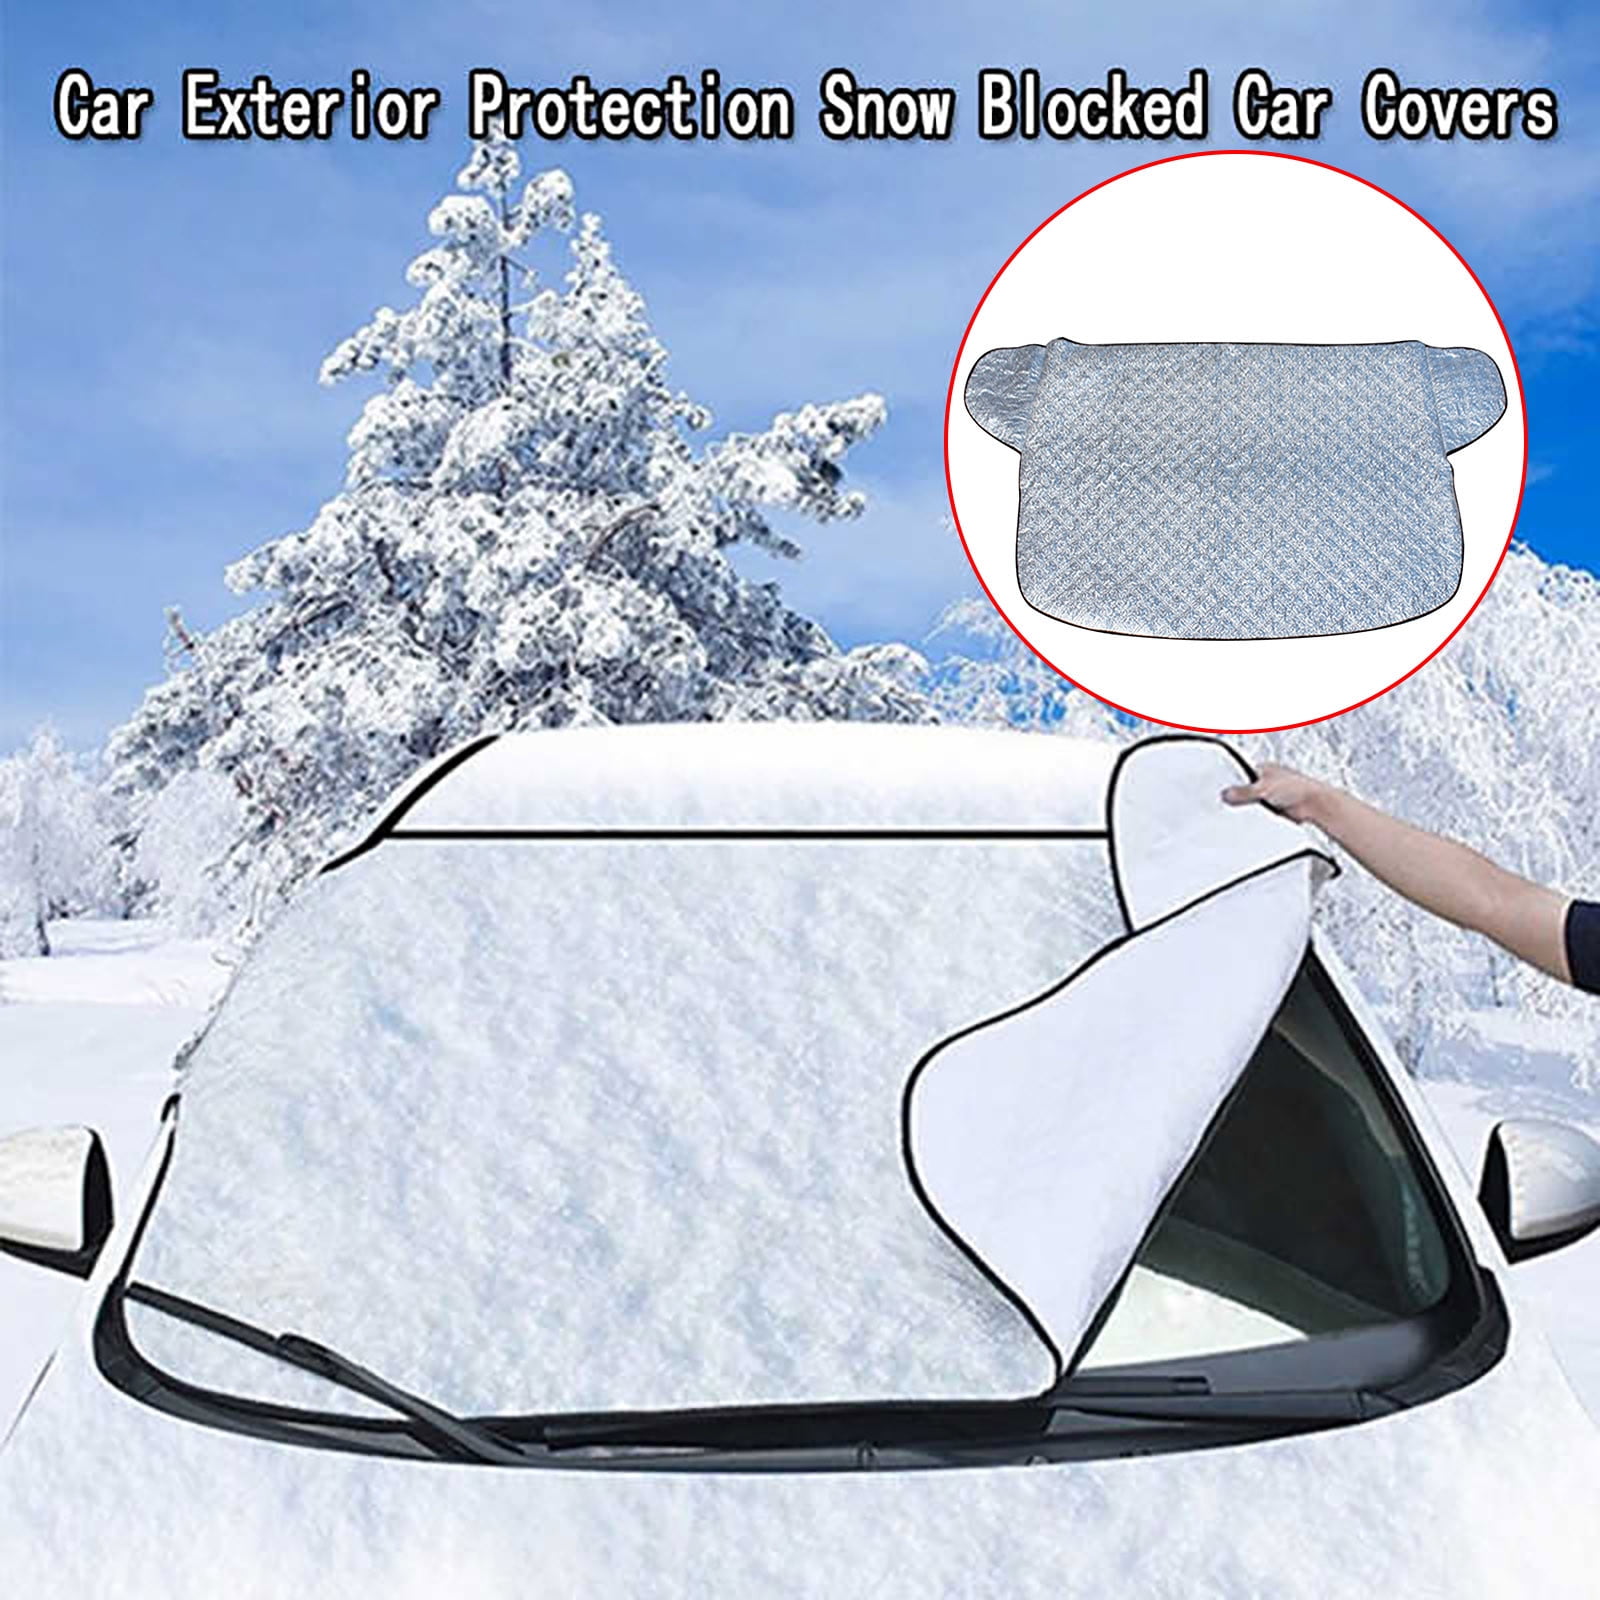 Extreme Products for Extreme Environments Universal Side Mirror Cover Snow Ice and Frost Protection 2 Pack Car Mirror Cover by Outback Shades Side View Mirror Covers 